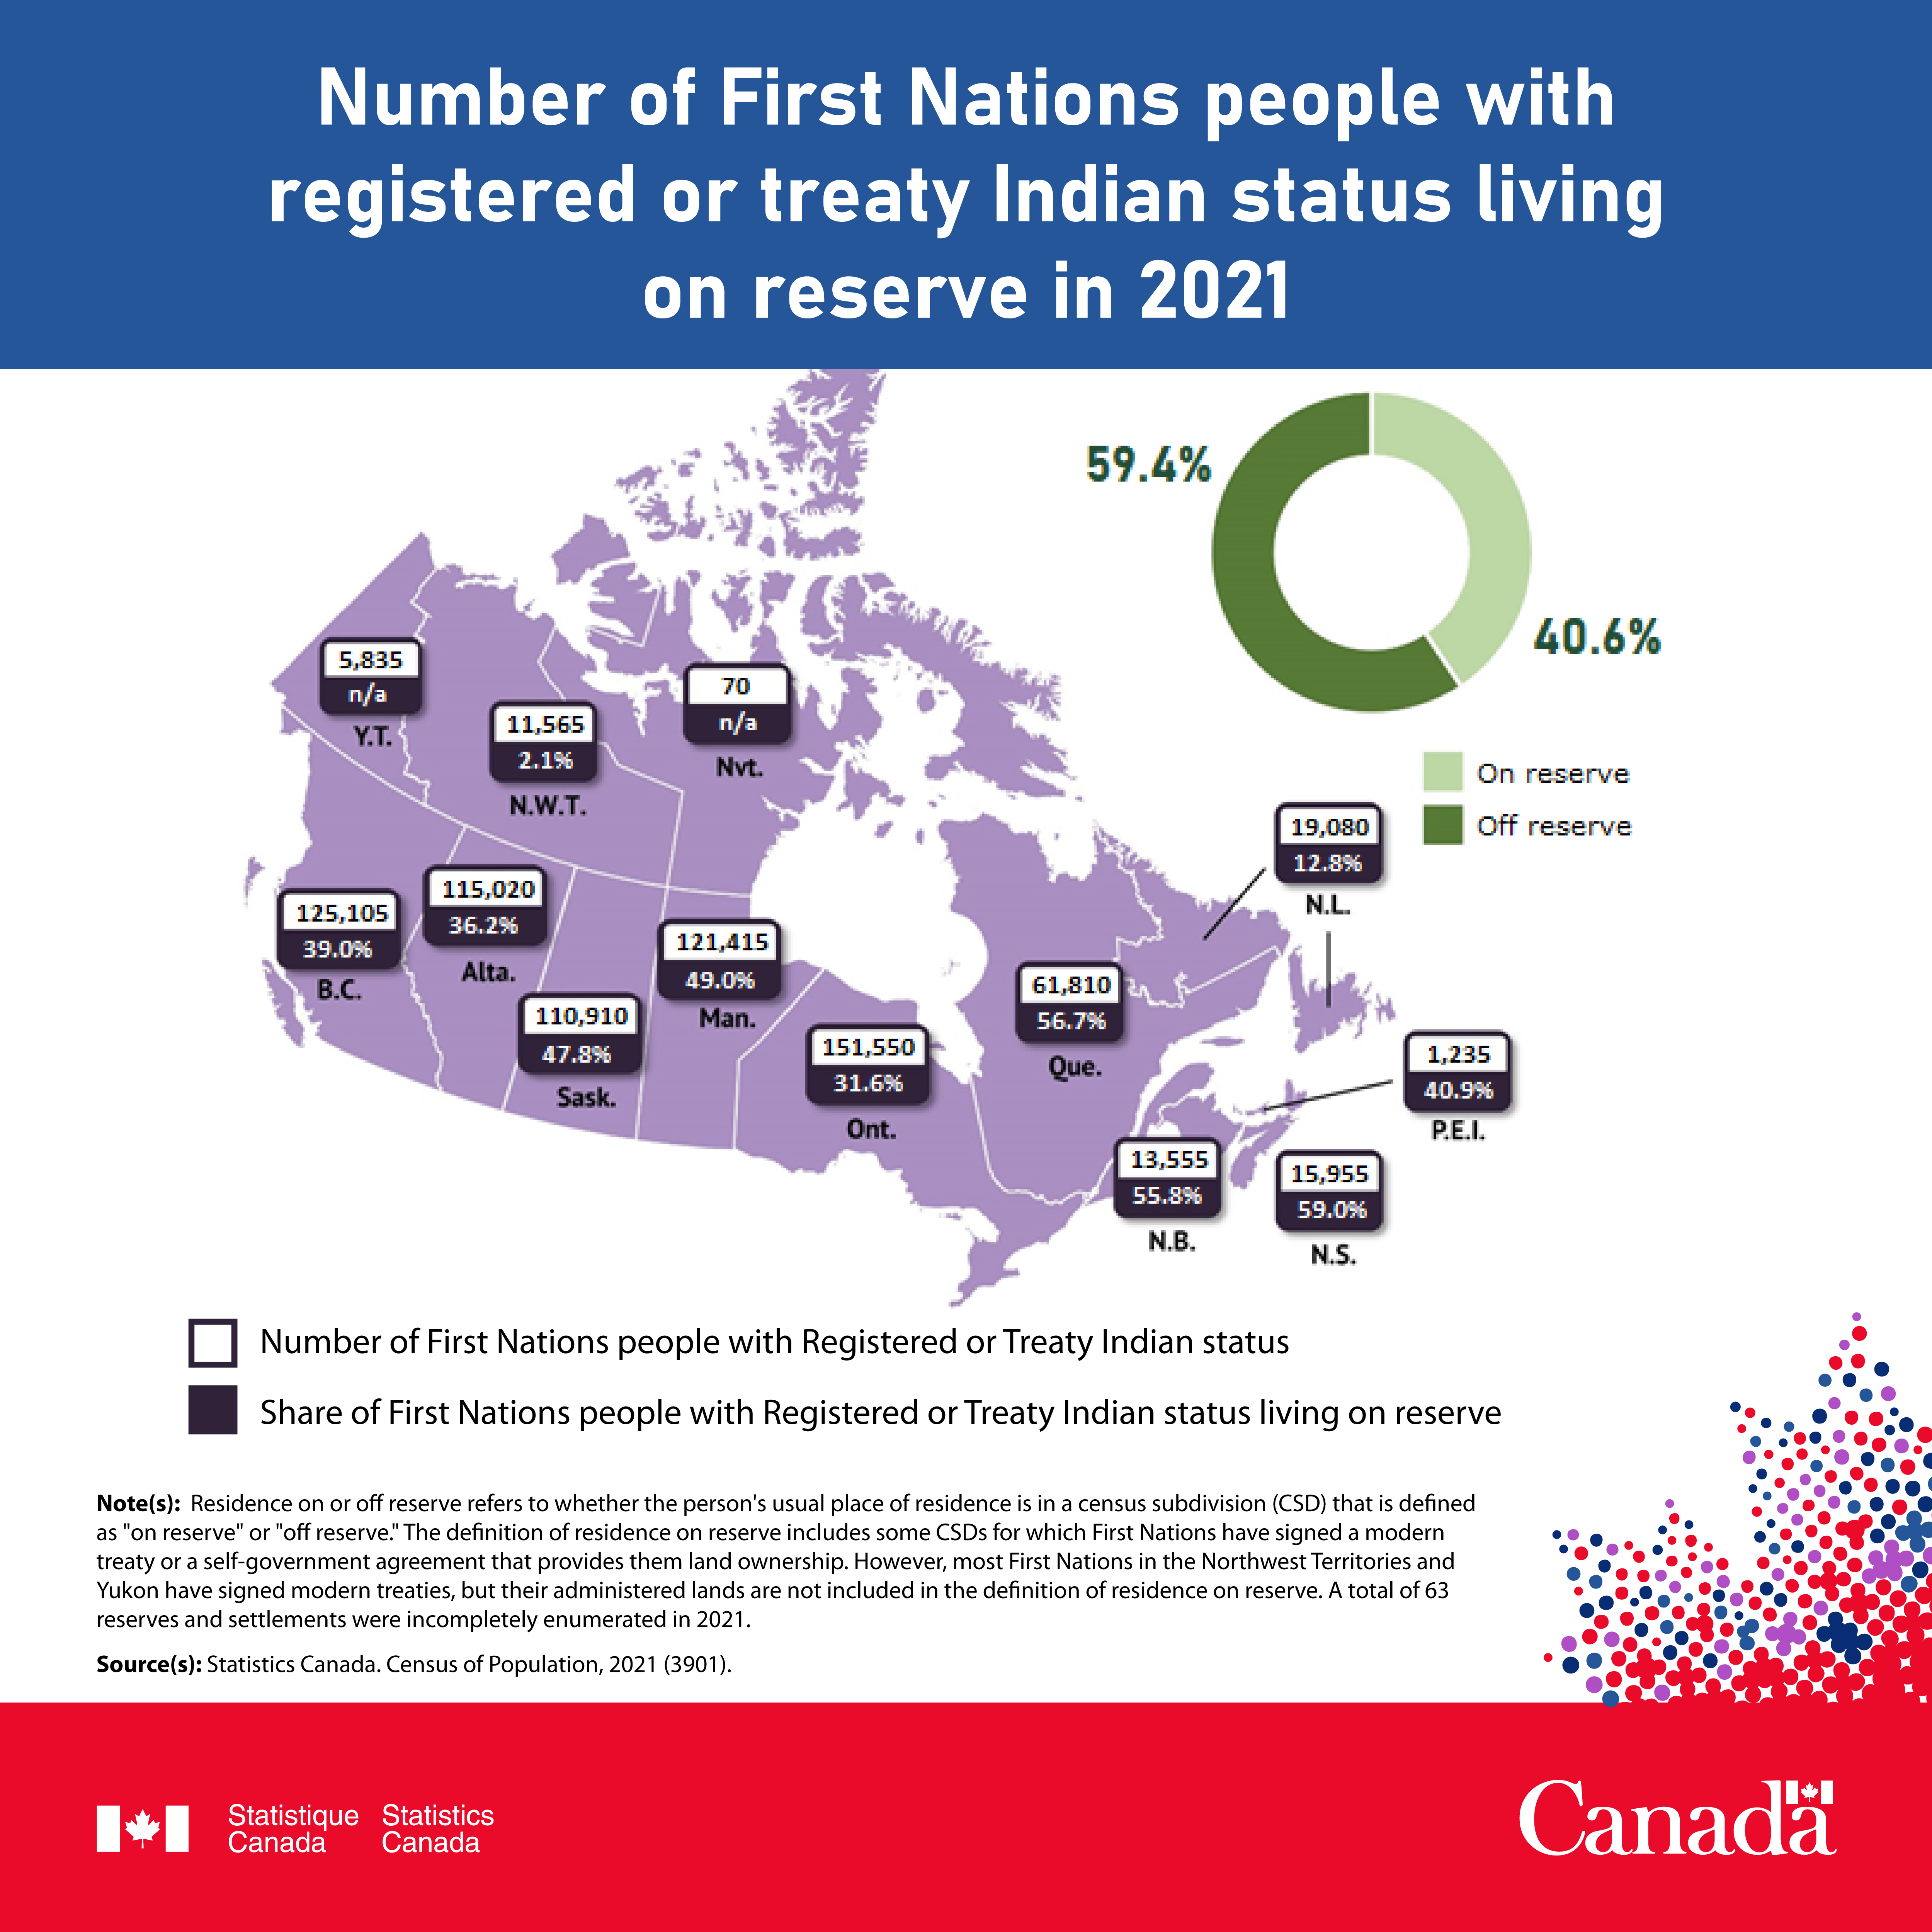 Post 3 image - Number of First Nations people with registered or treaty Indian status living on reserve in 2021